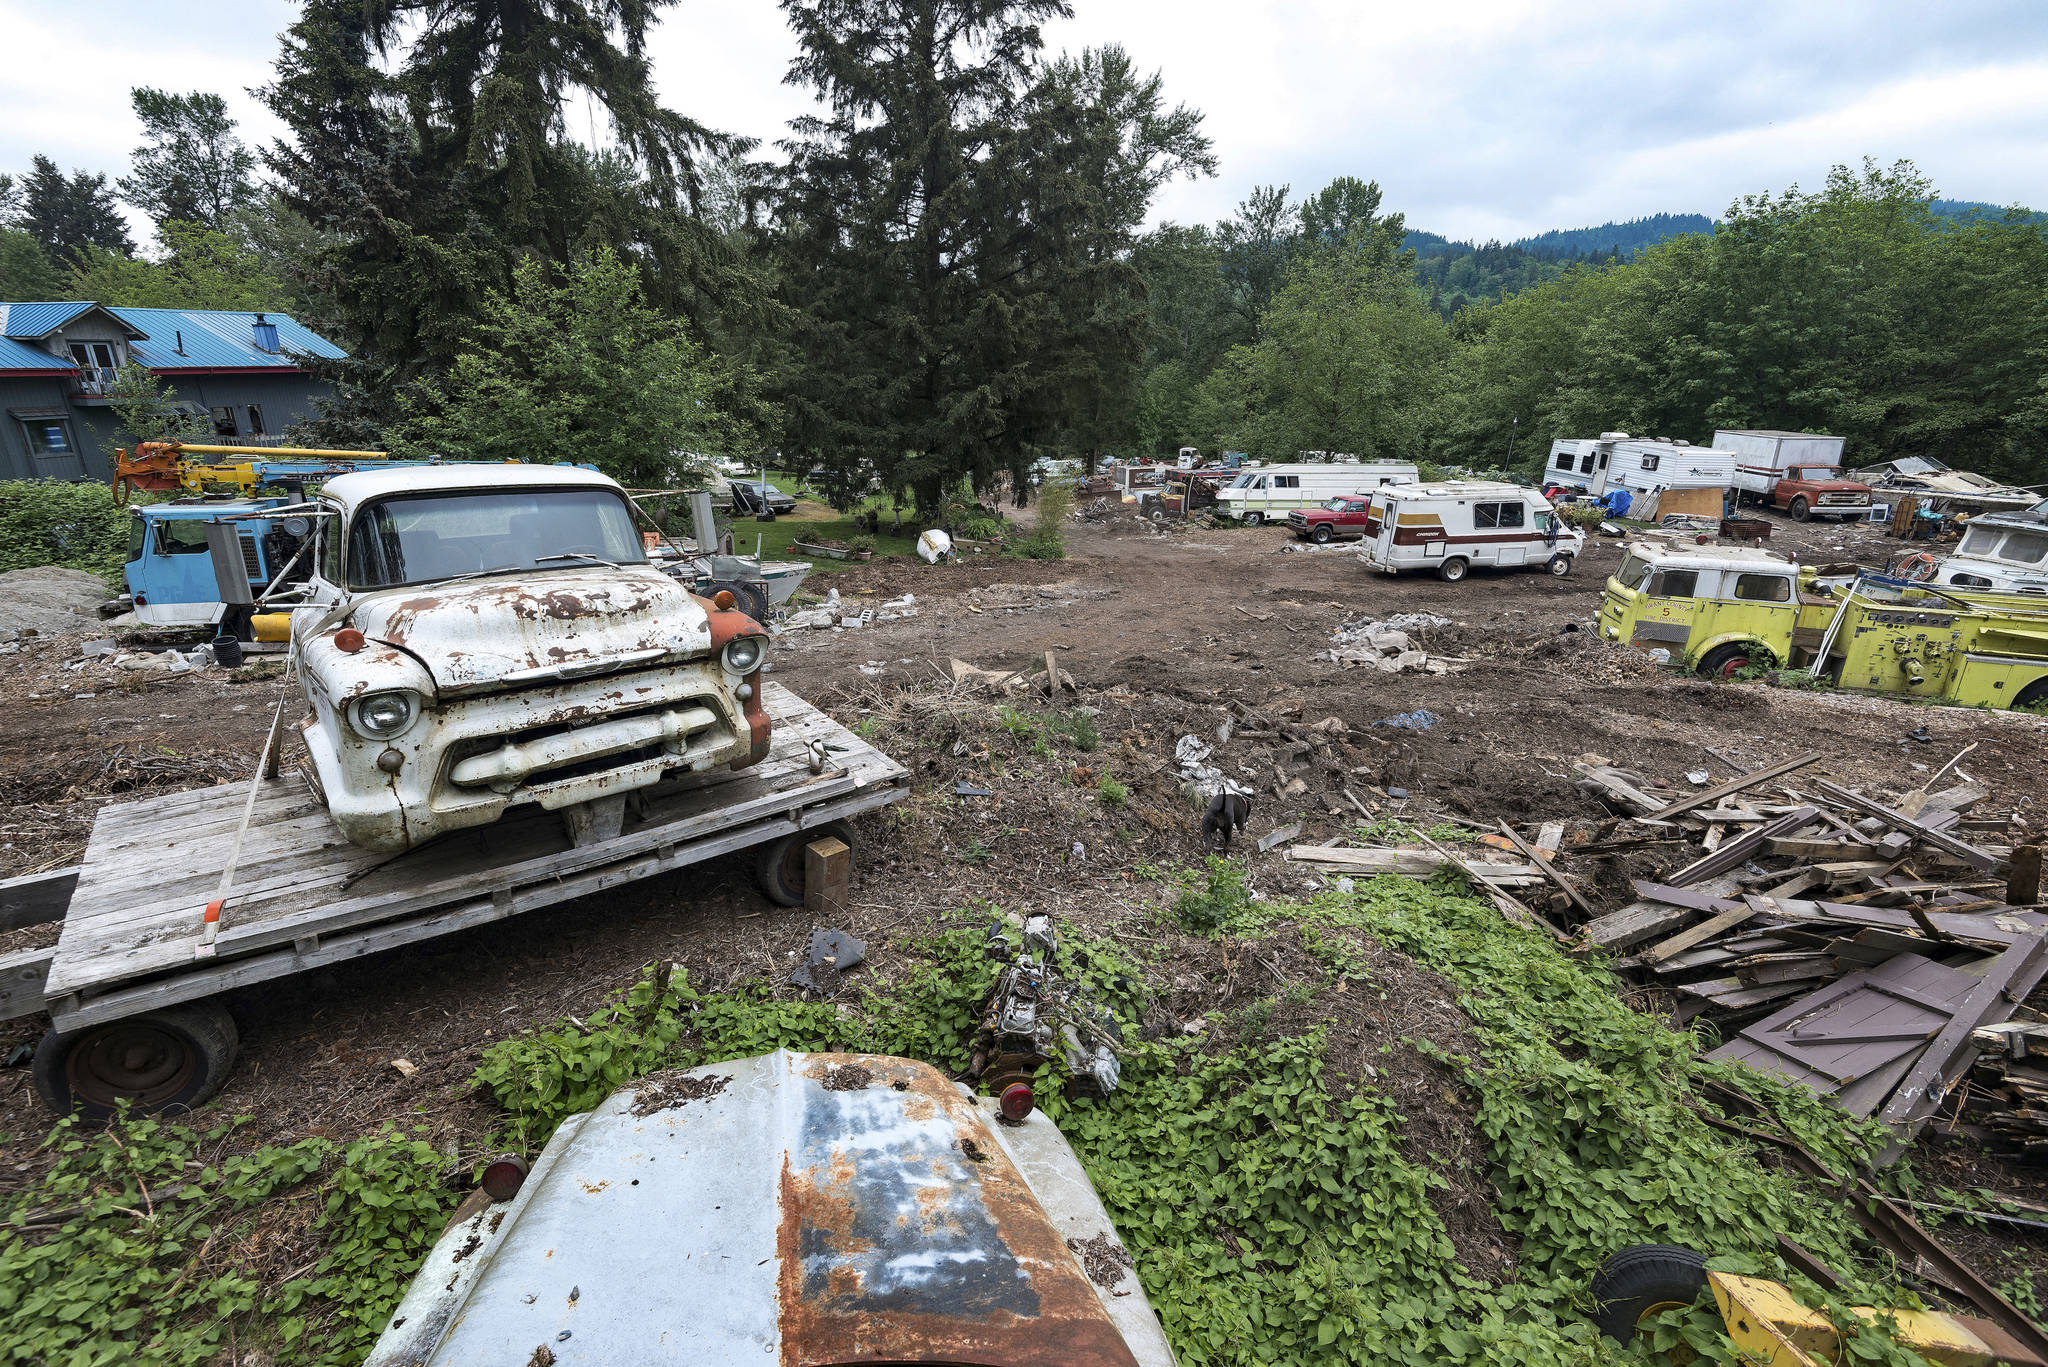 The 10 acre plot known as Iron Mountain is home to countless broken-down cars, boats, fire trucks, buses, and even a street sweeper. The sprawling junkyard encircles Pillon’s home. Photo by Caean Couto